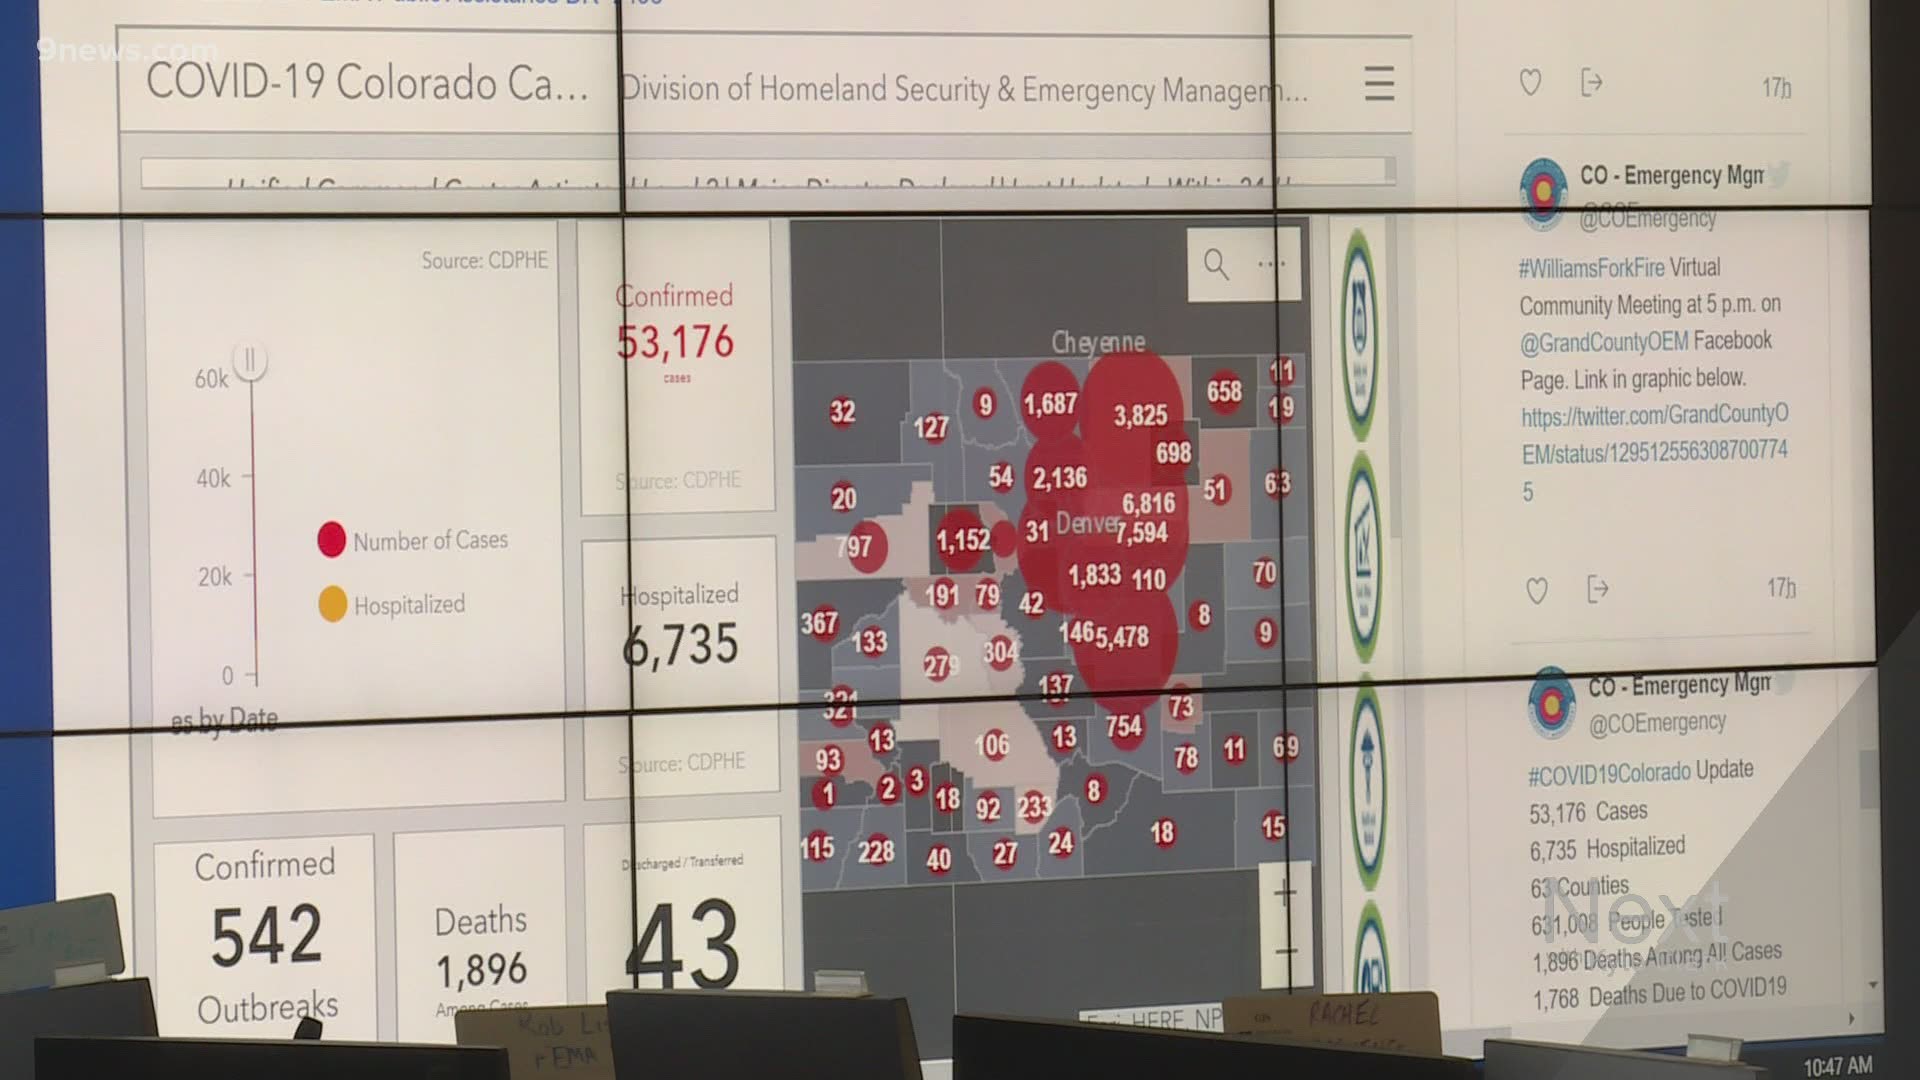 Colorado's emergency management team is dealing with a lot of emergencies right now.